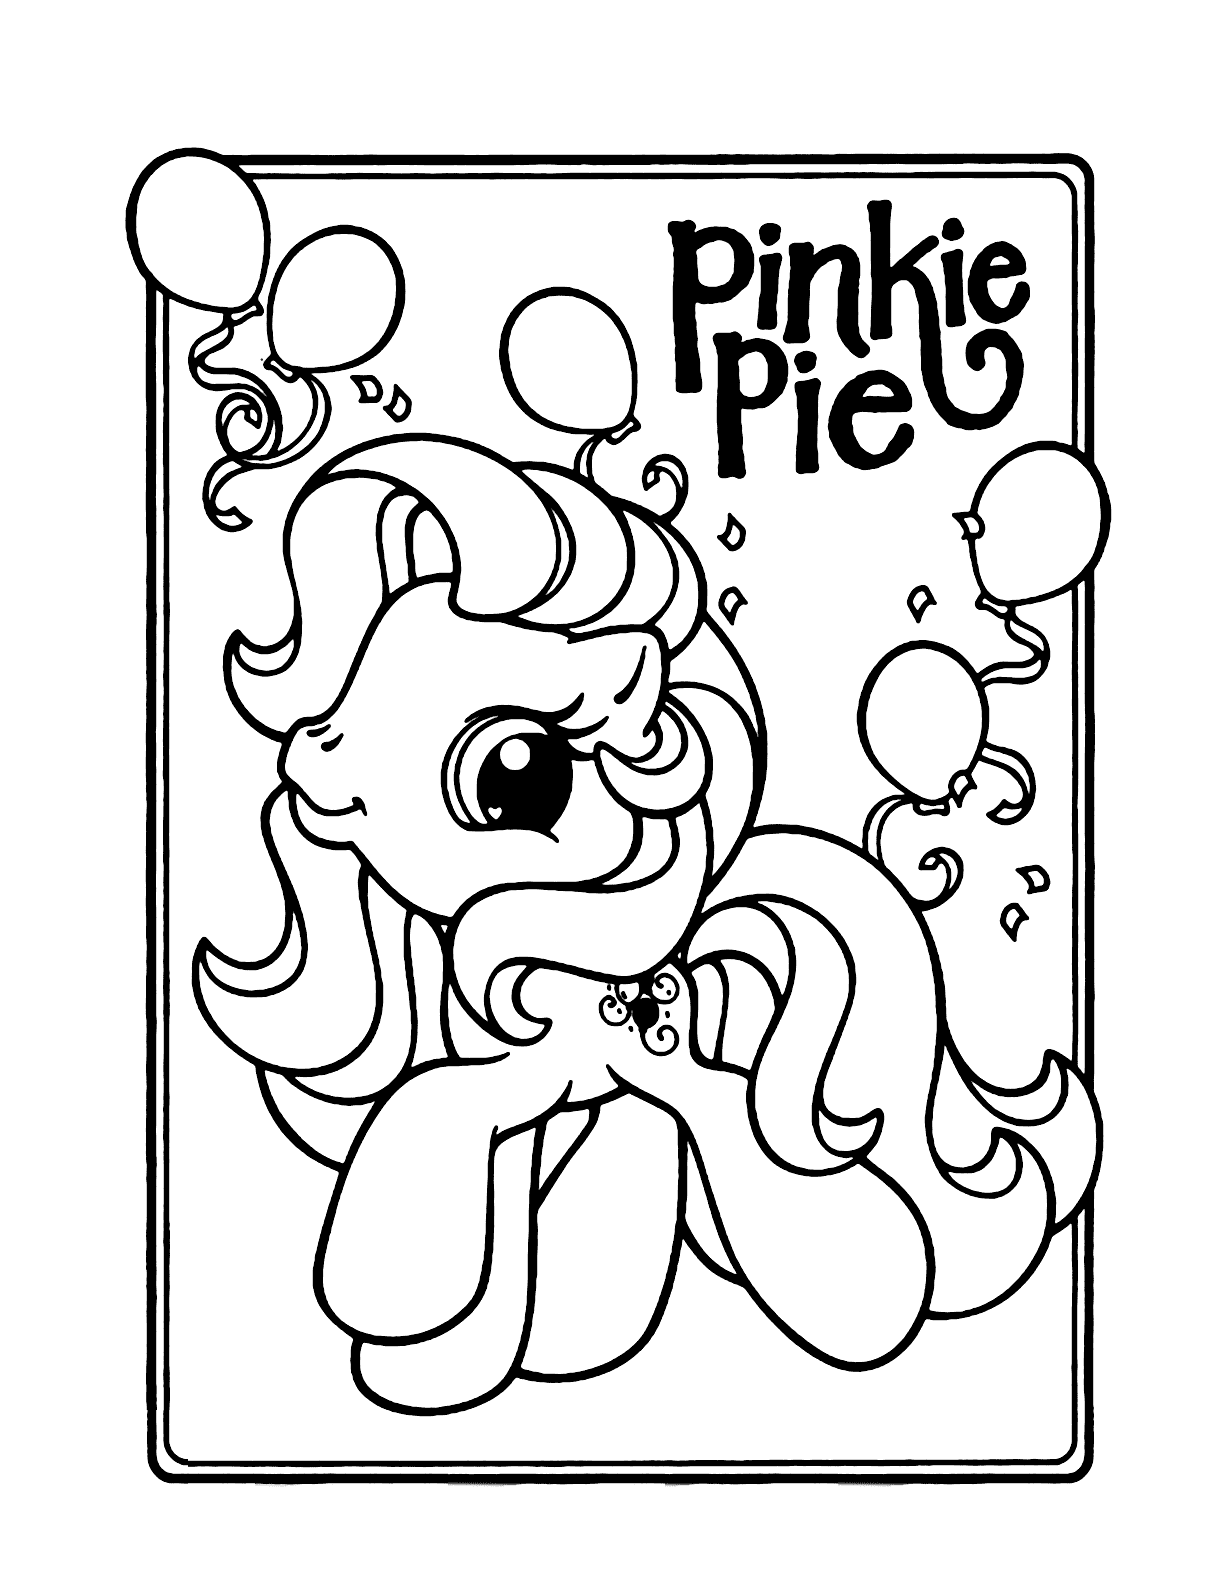 printable pinkie pie coloring pages